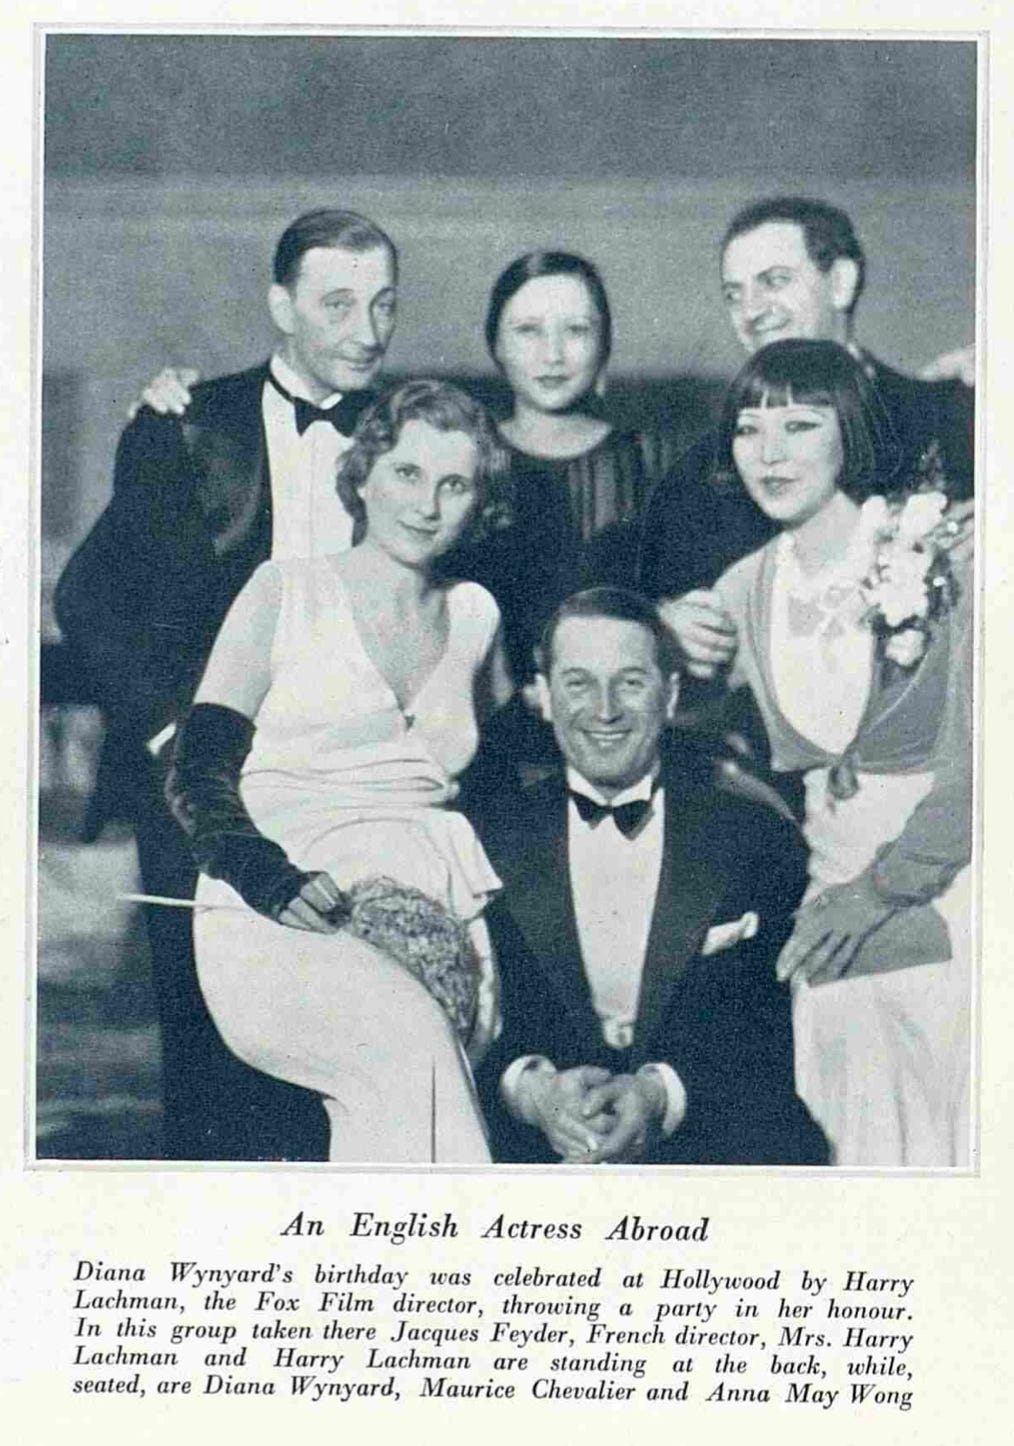 clipping from The Bystander, black and white photo of the Lachmans, Diana Wynyard, and other guests at a party